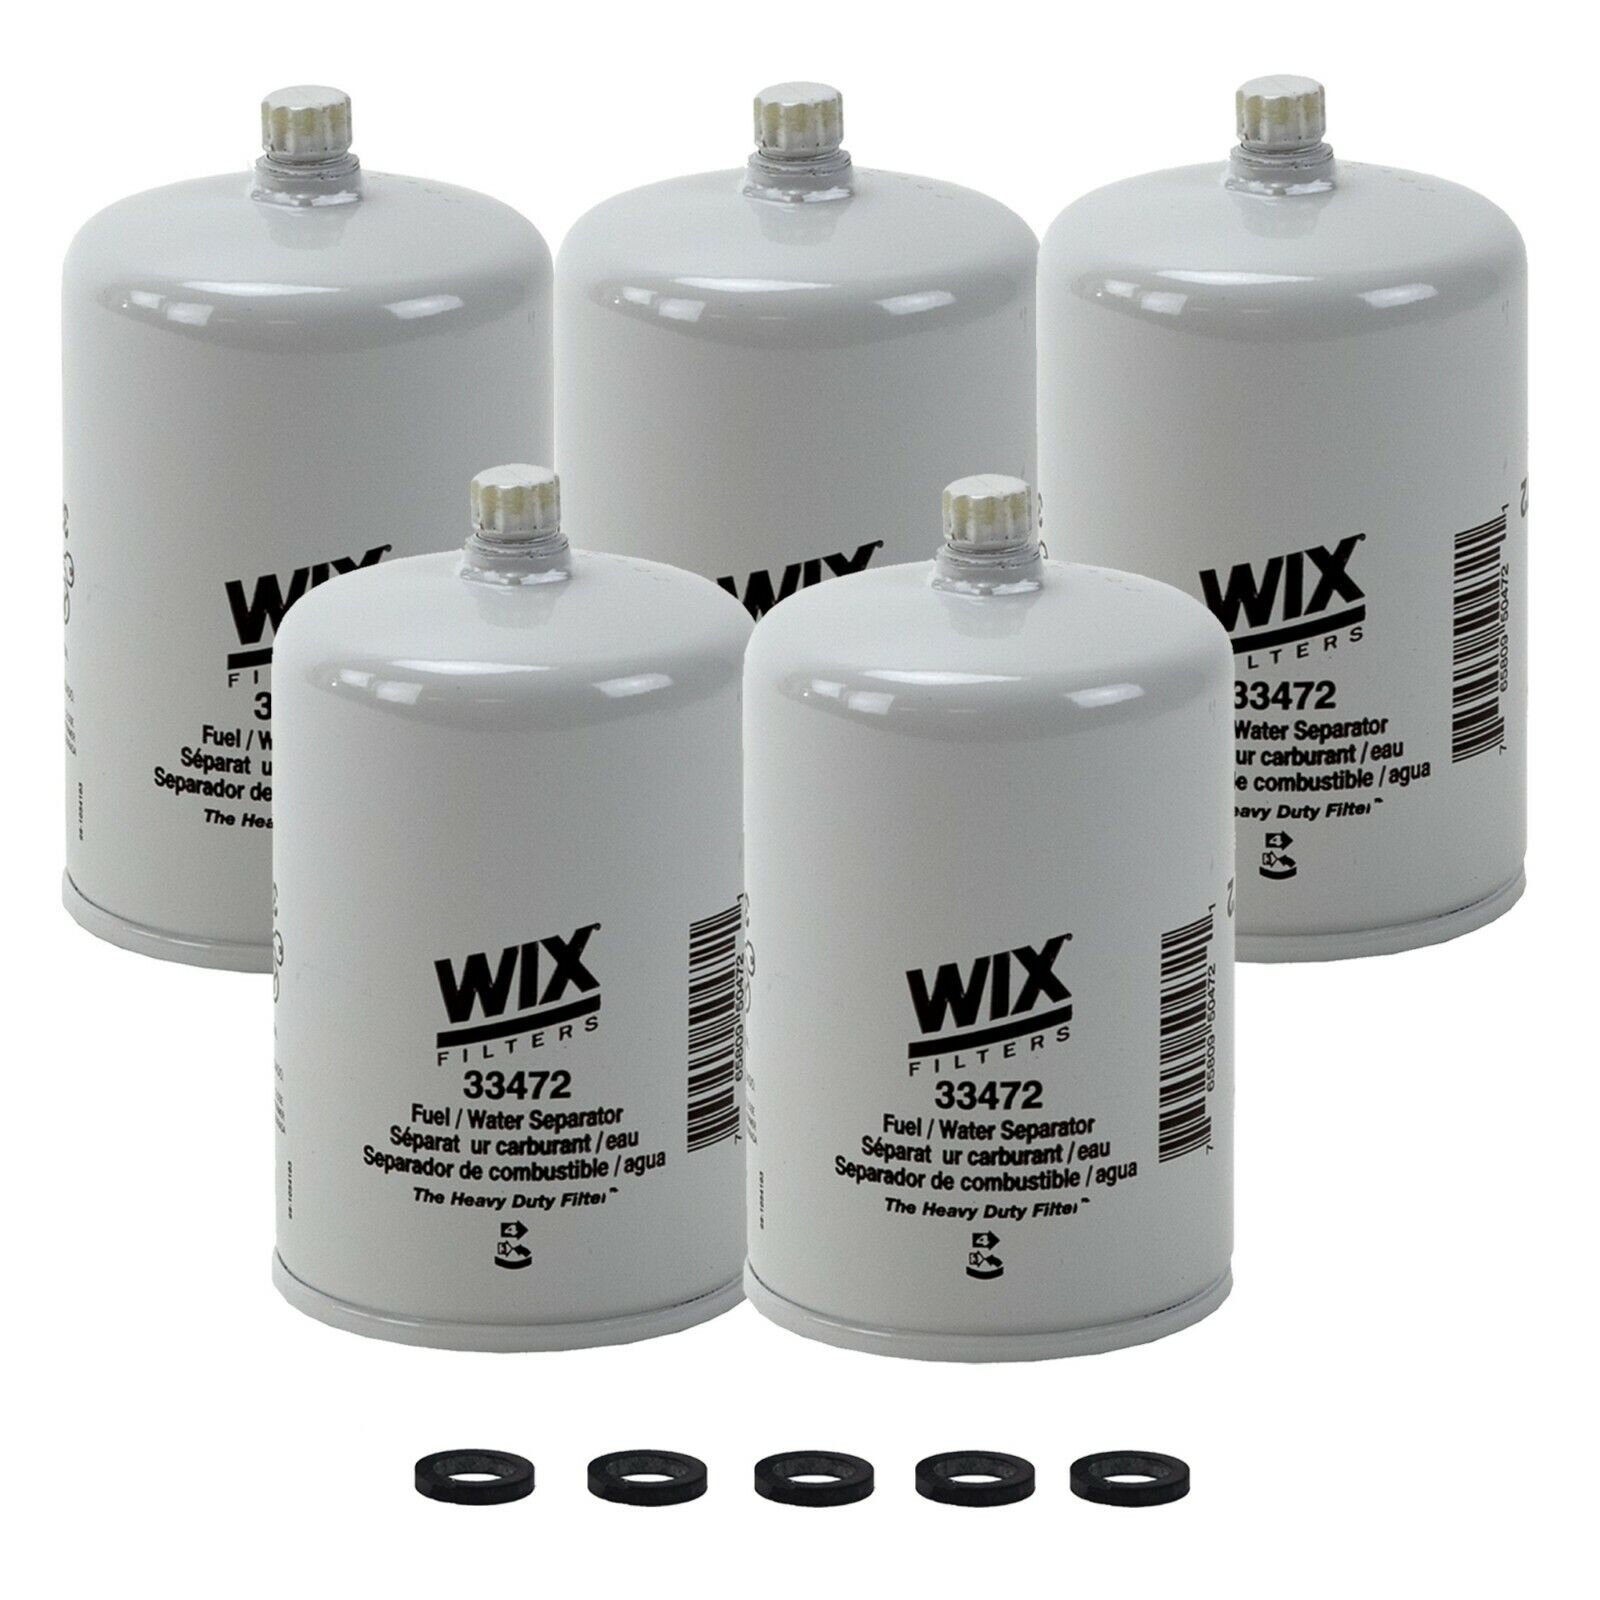 WIX Set of 5 Fuel Water Separator Filters for Audi Blue Bird Chevy Ford GMC VW